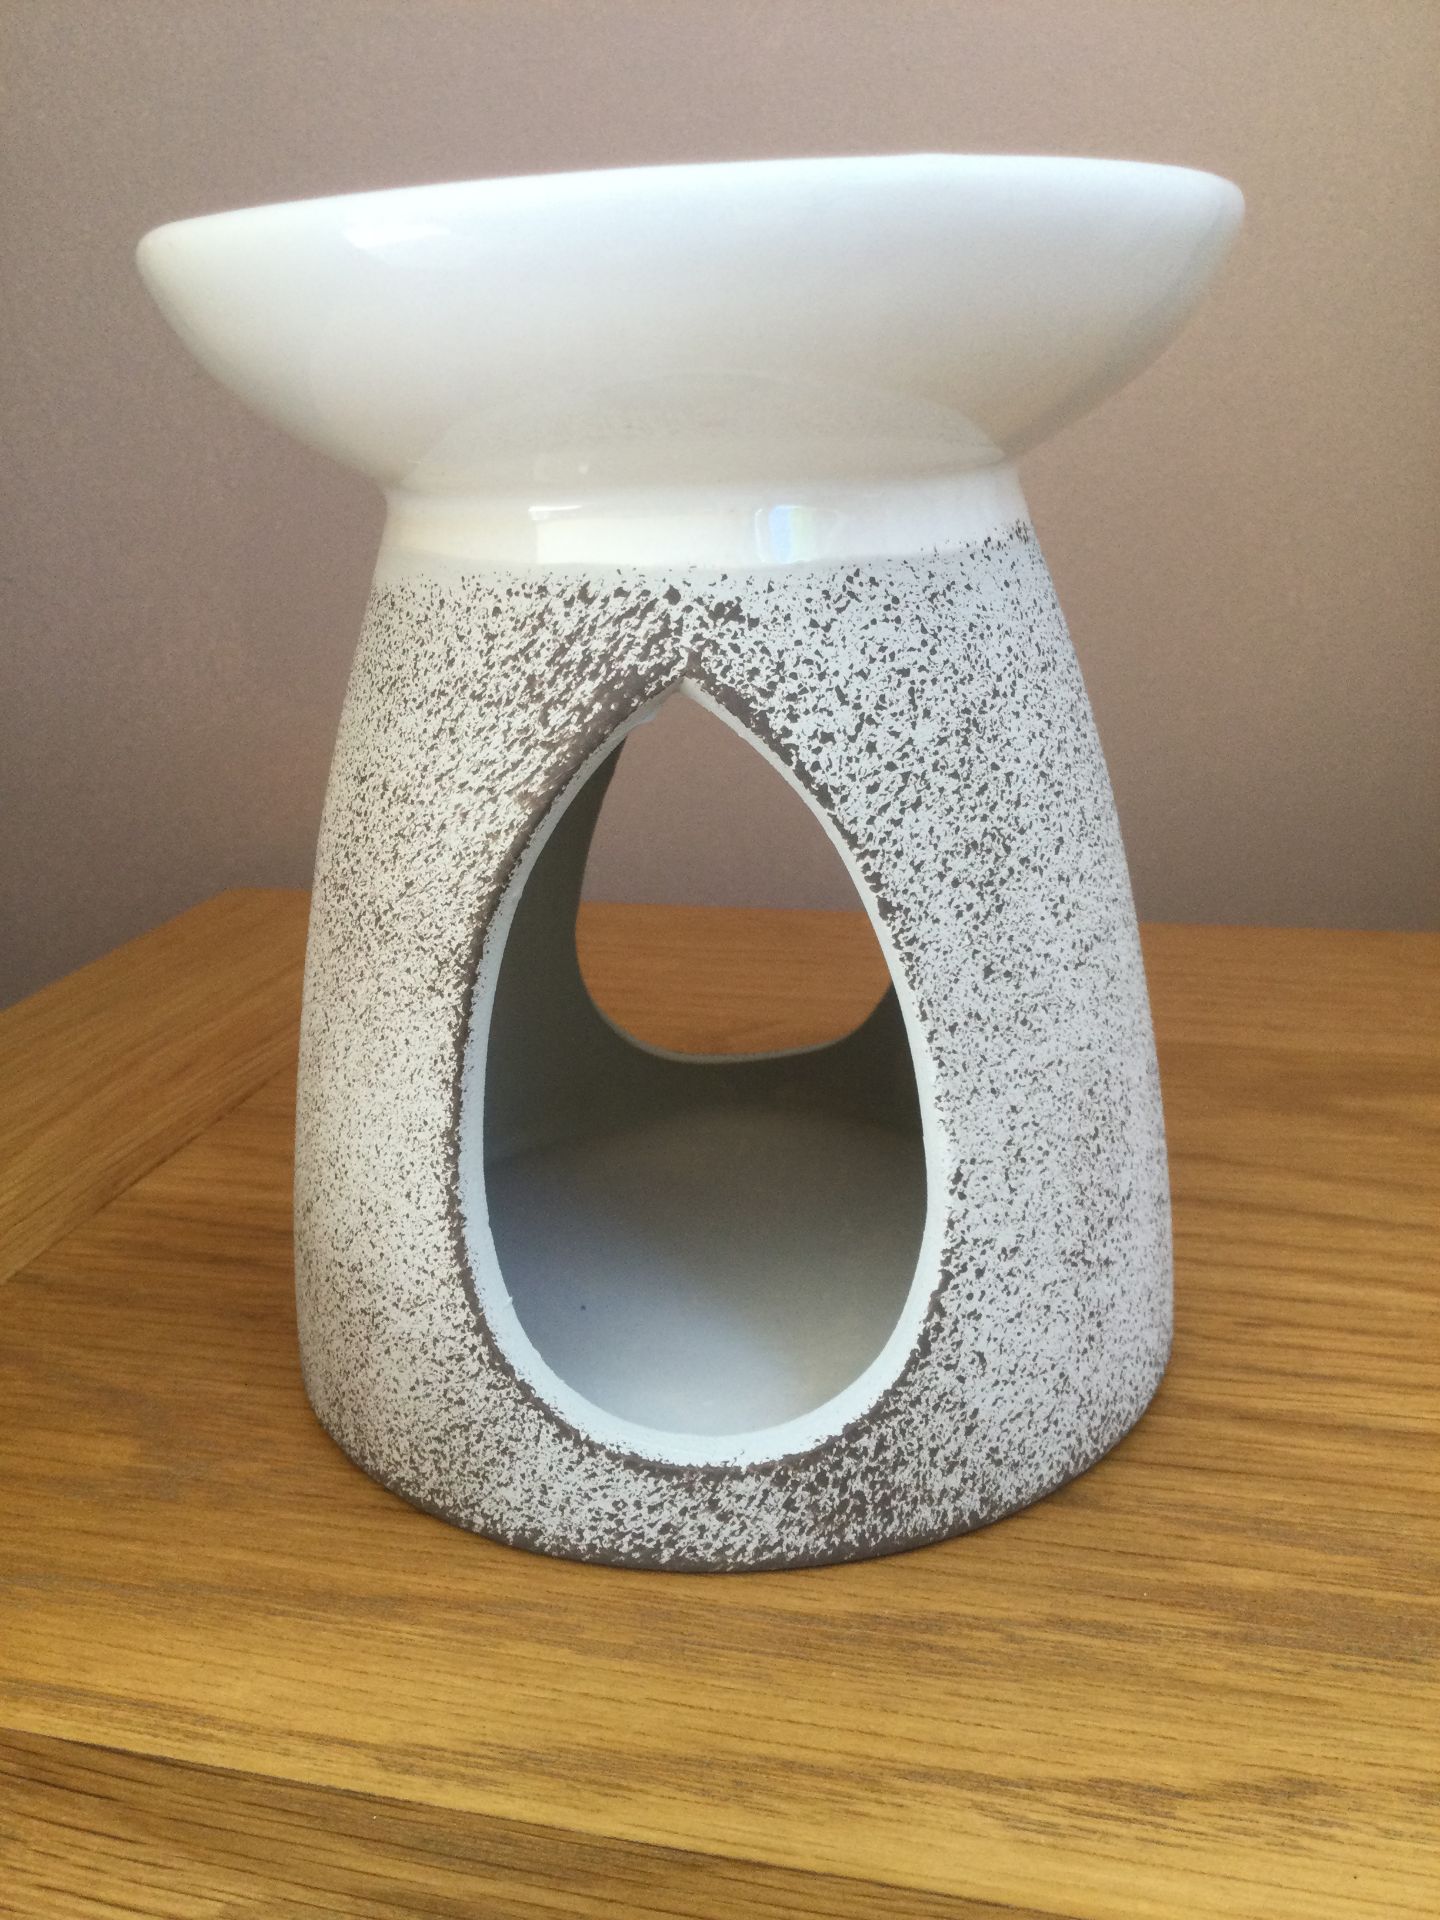 Piquaboo Large “Rustic White” Ceramic Oil Burner Height 13cm, New With Gift Box - Image 3 of 3